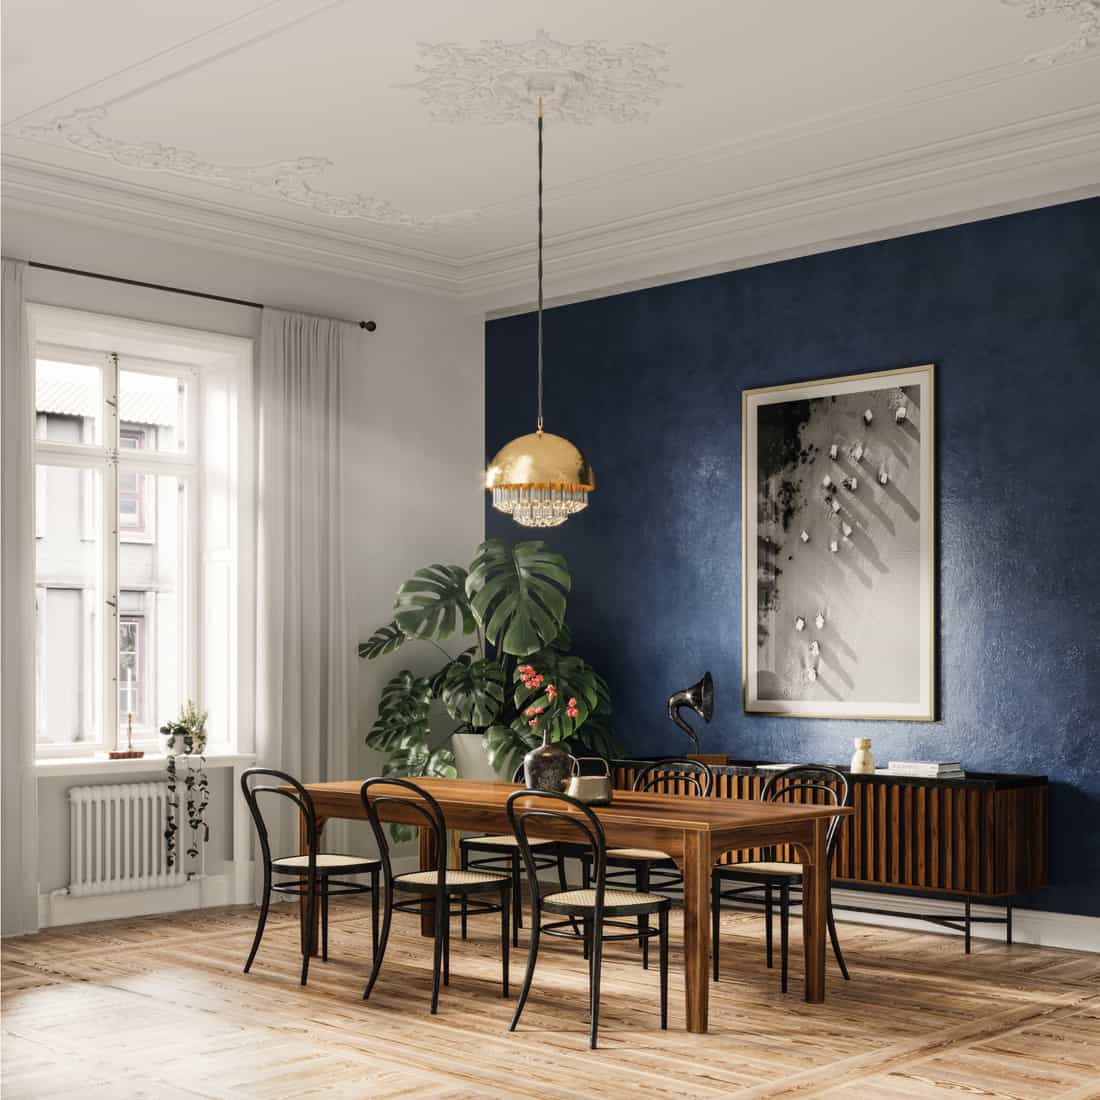 Elegant dining table in a modern home with dining table and chairs, chandelier and navy blue wall